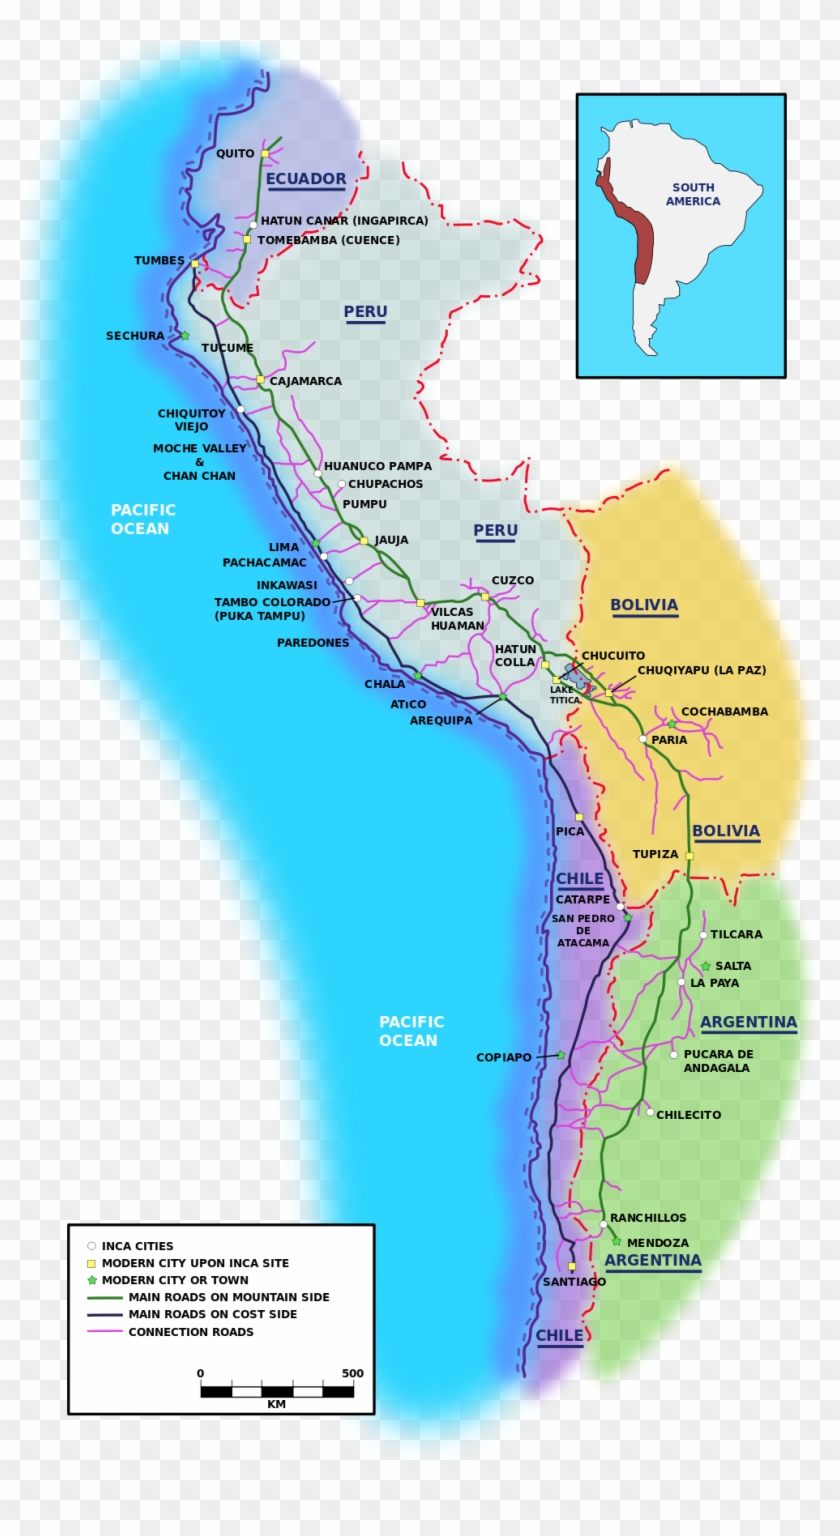 The Inca Road System - Incan Road System Clipart #4942930